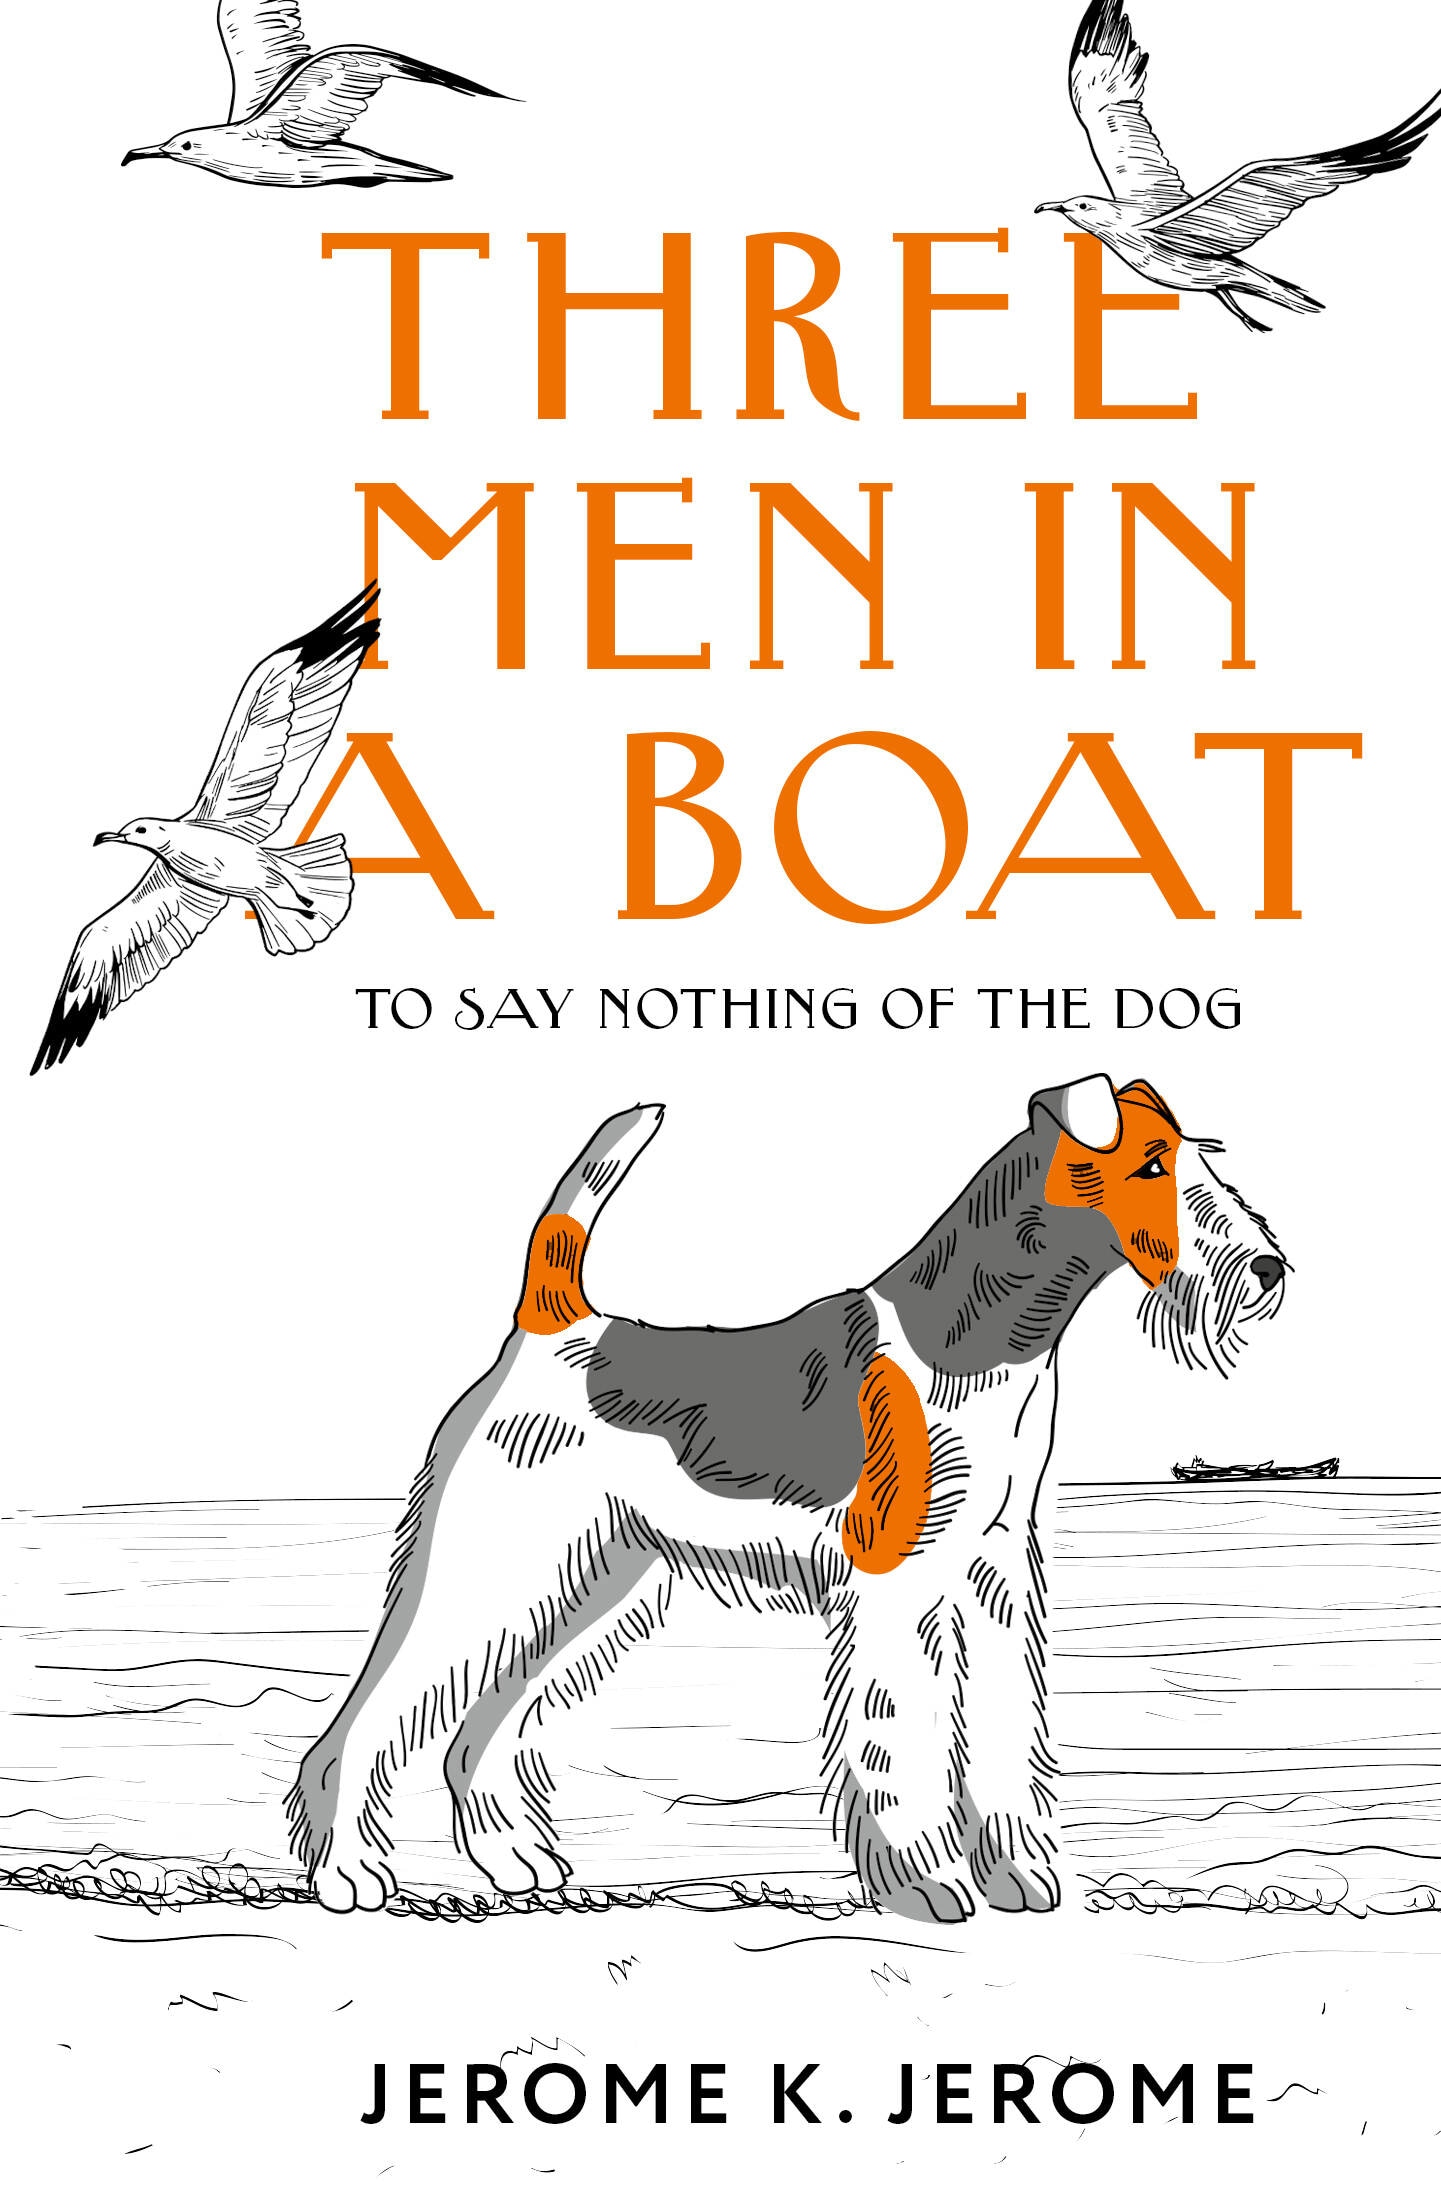 Book “Three Men in a Boat (To say Nothing of the Dog)” by Джером Клапка Джером — 2023